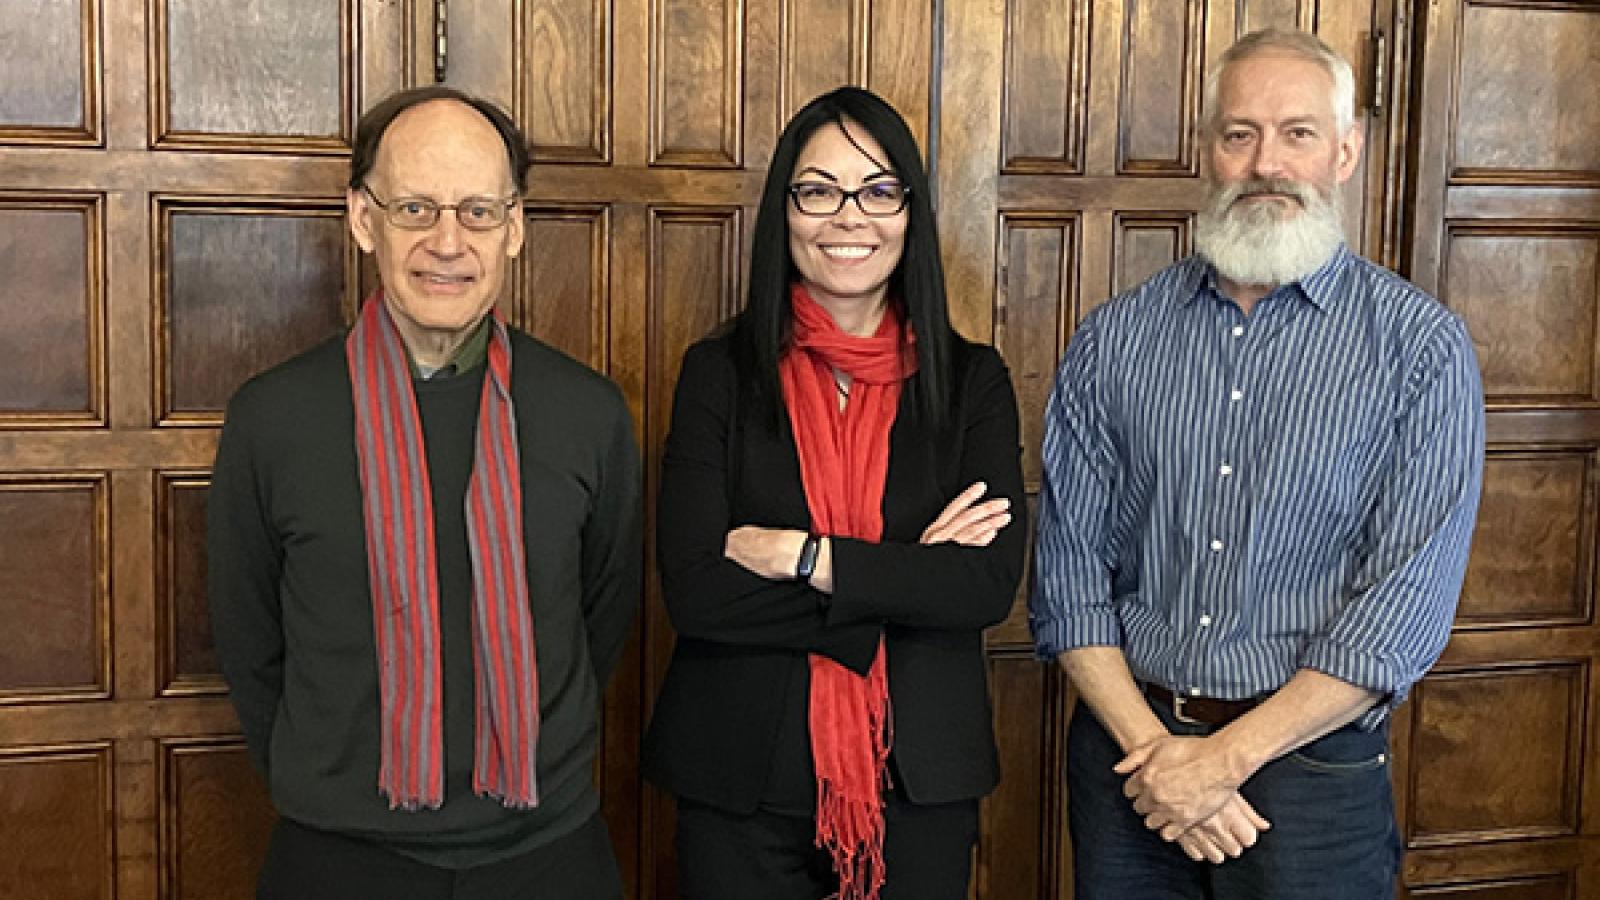 Professor Bert Winther-Tamaki (University of California, Irvine) and Professor Thomas LaMarre (University of Chicago) traveled to Ohio State to participate in a workshop for Namiko Kunimoto's book project, Imperial Animations in Transpacific Contemporary Art. 